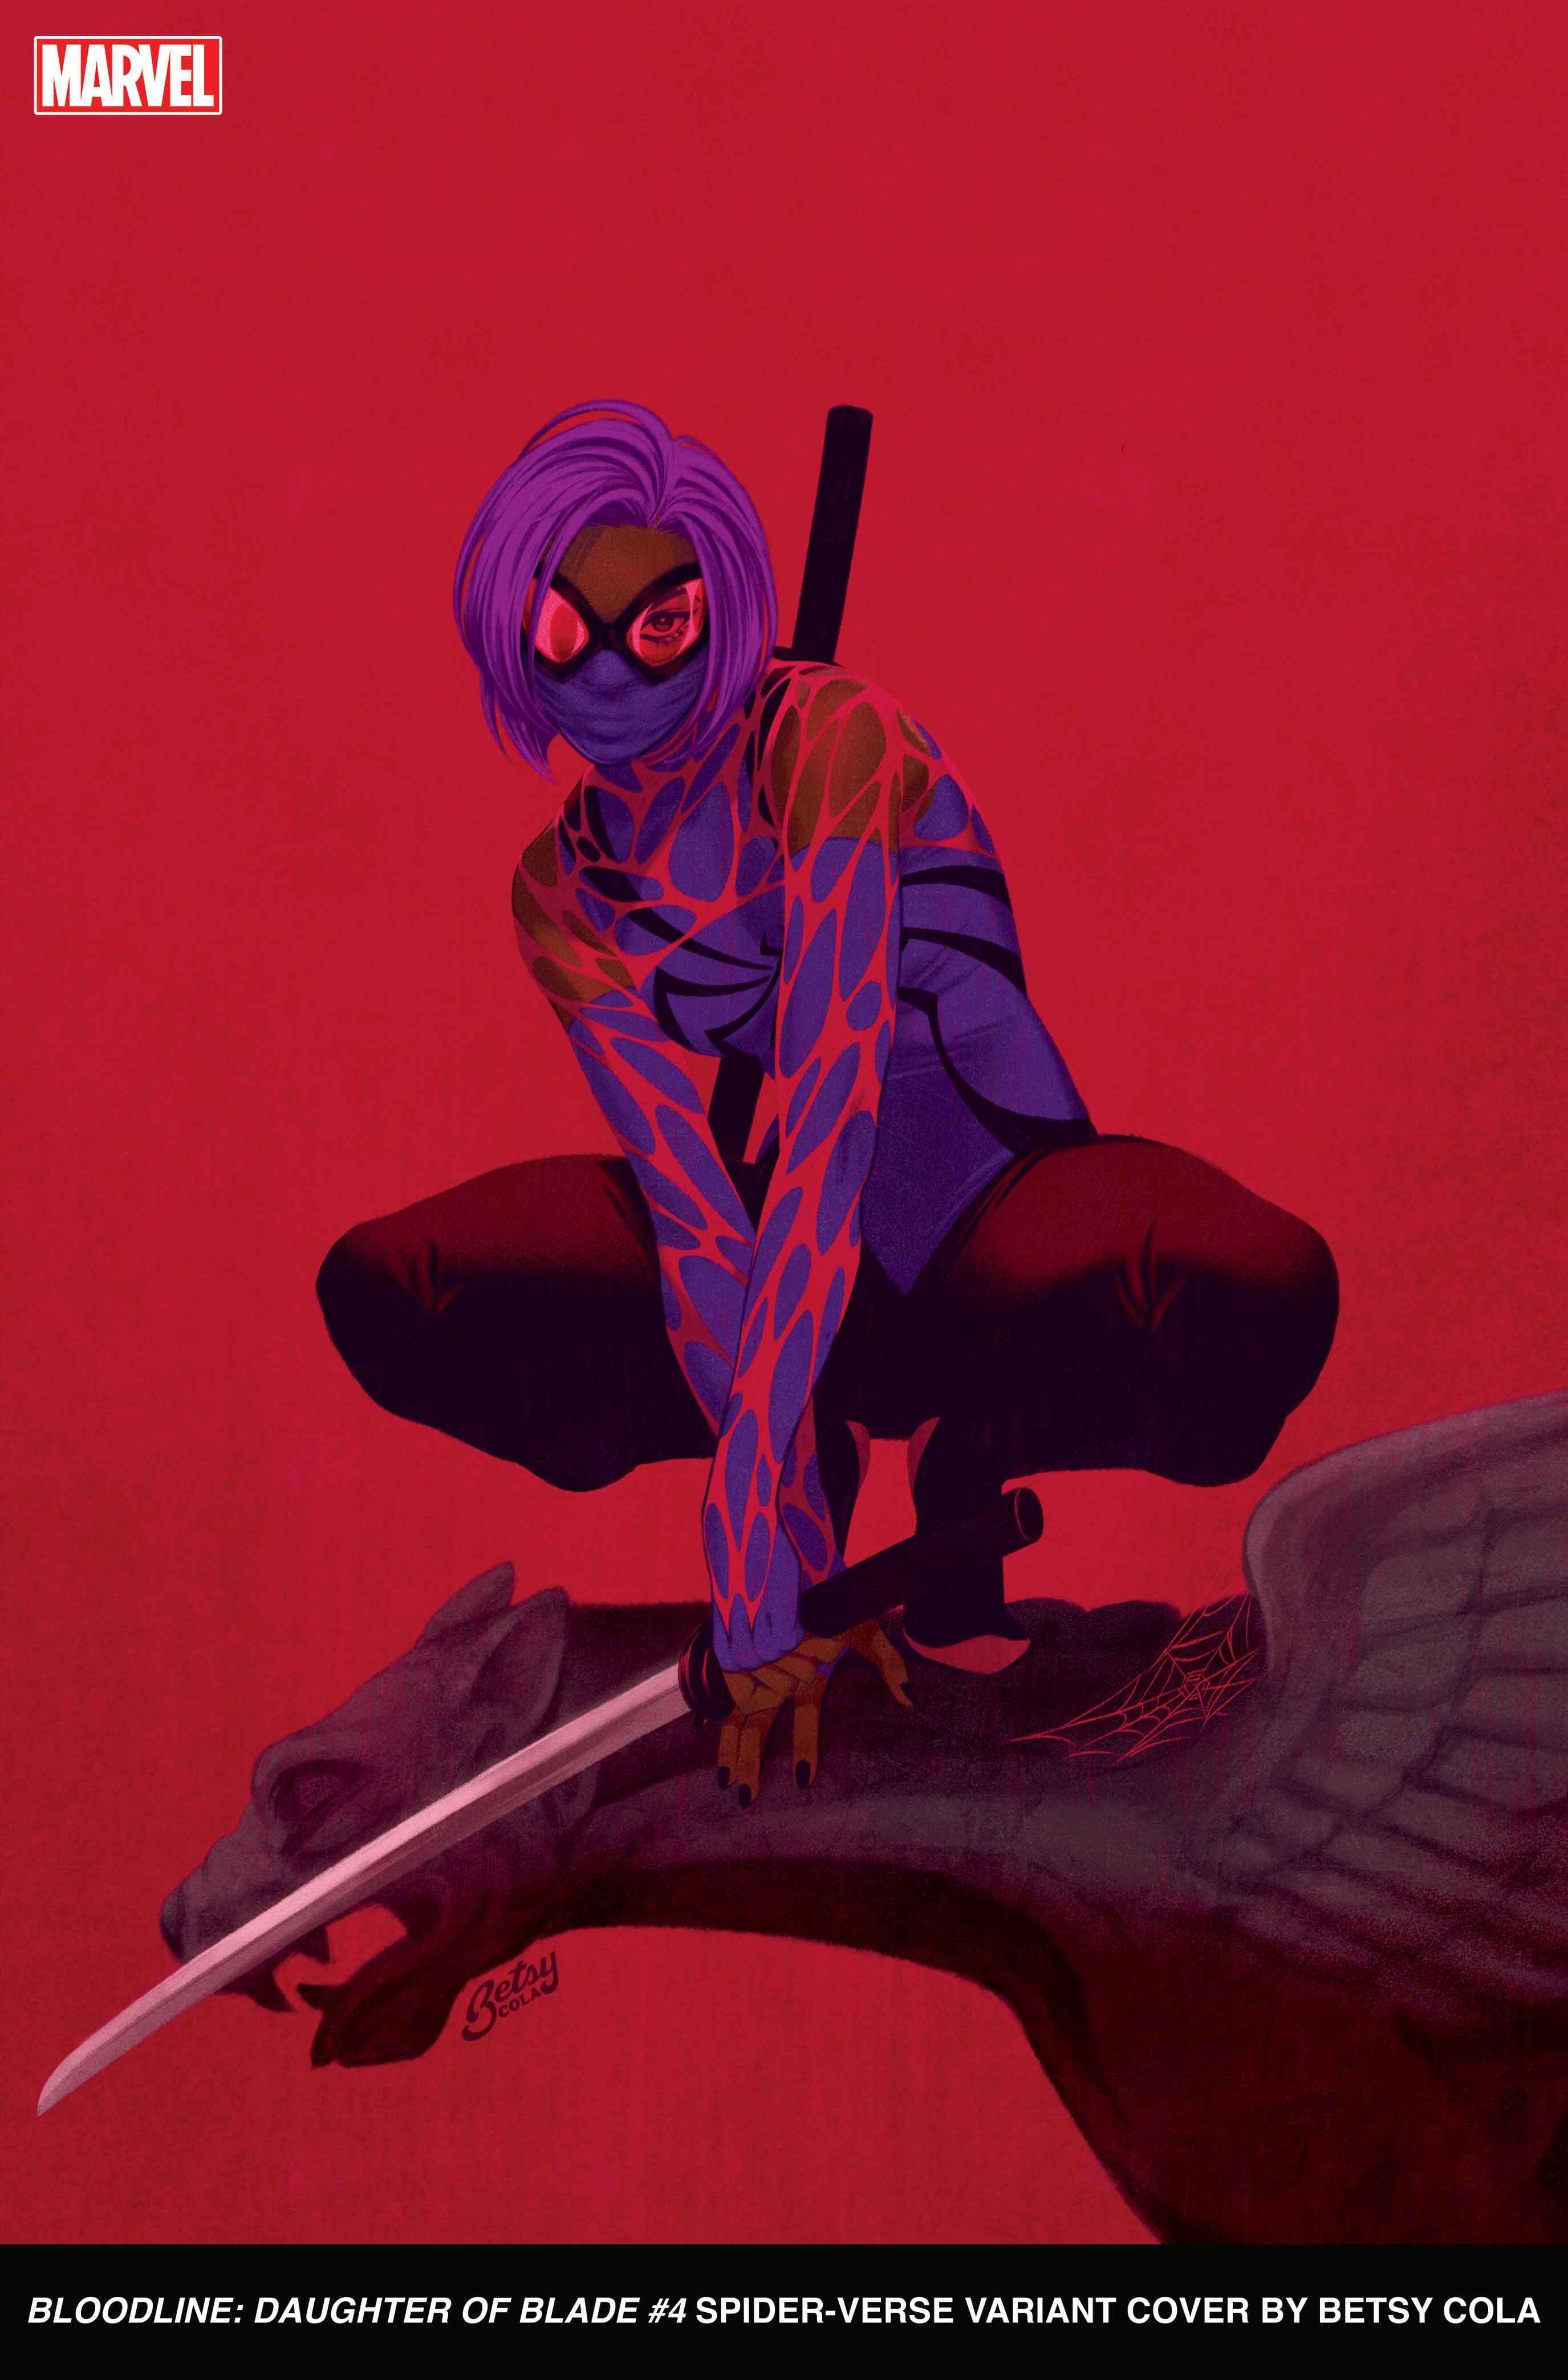 BLOODLINE: DAUGHTER OF BLADE #4 Spider-Verse Variant Cover by Betsy Cola